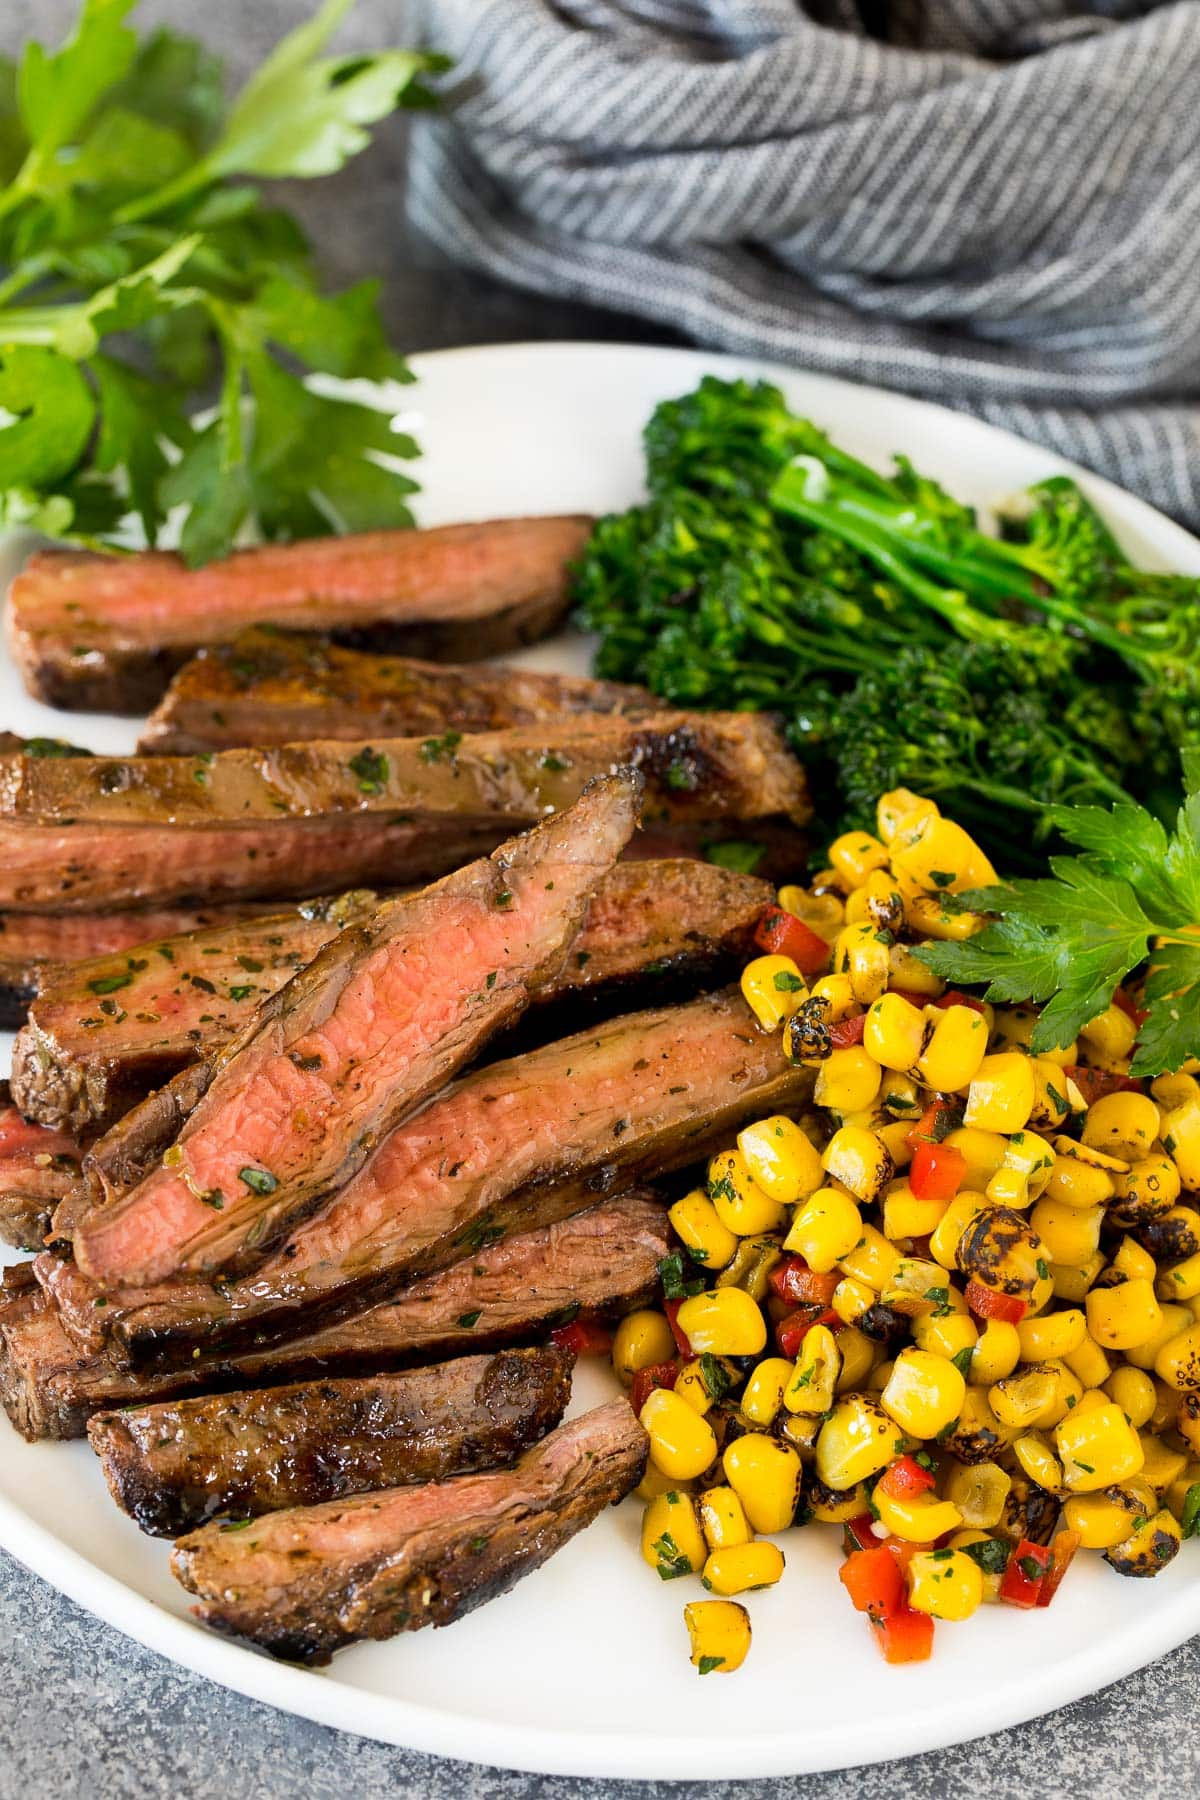 Grilled flank steak served with corn and broccoli.